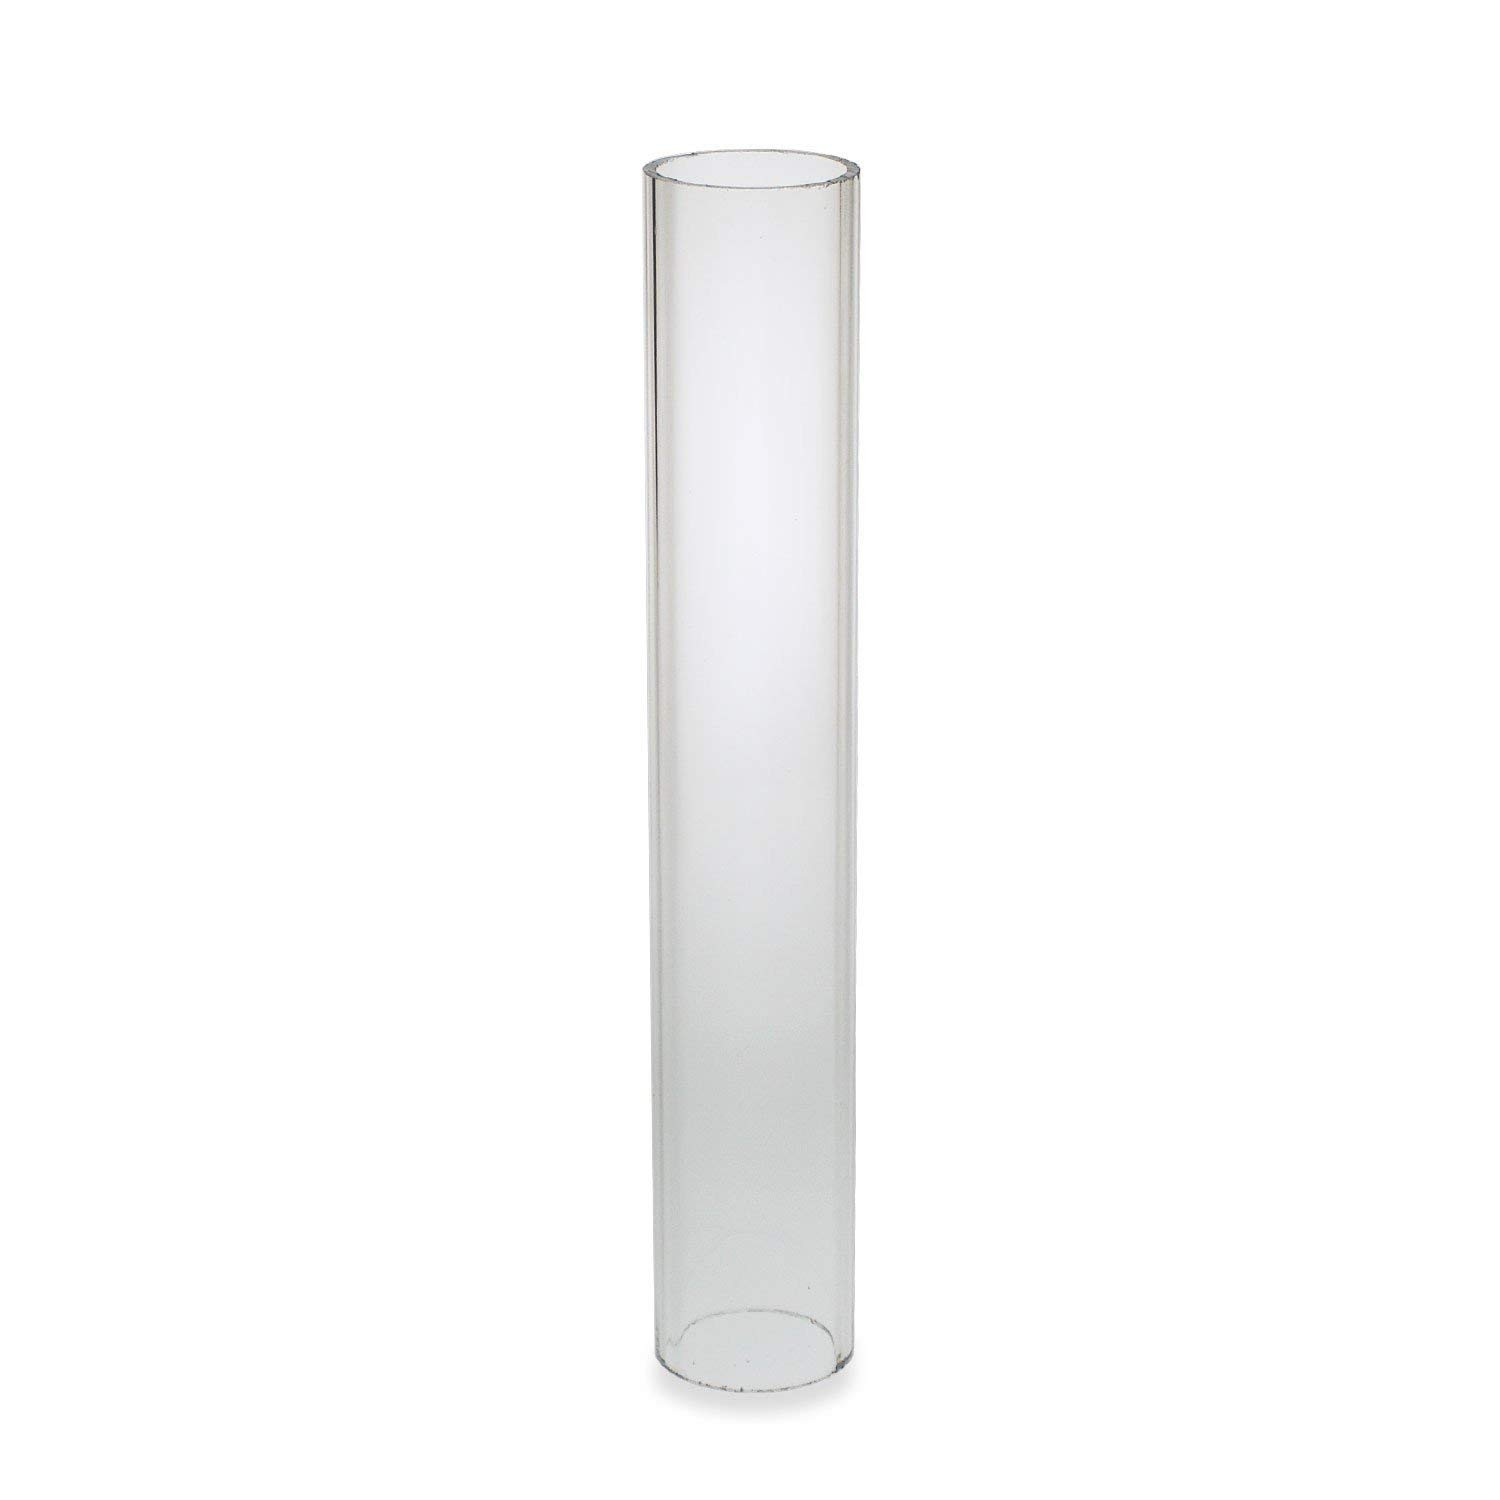 13 Lovely 24 Inch Clear Vases 2024 free download 24 inch clear vases of amazon com source one deluxe clear acrylic tube 3 inches thick 24 regarding amazon com source one deluxe clear acrylic tube 3 inches thick 24 inch 3 inch wide office p